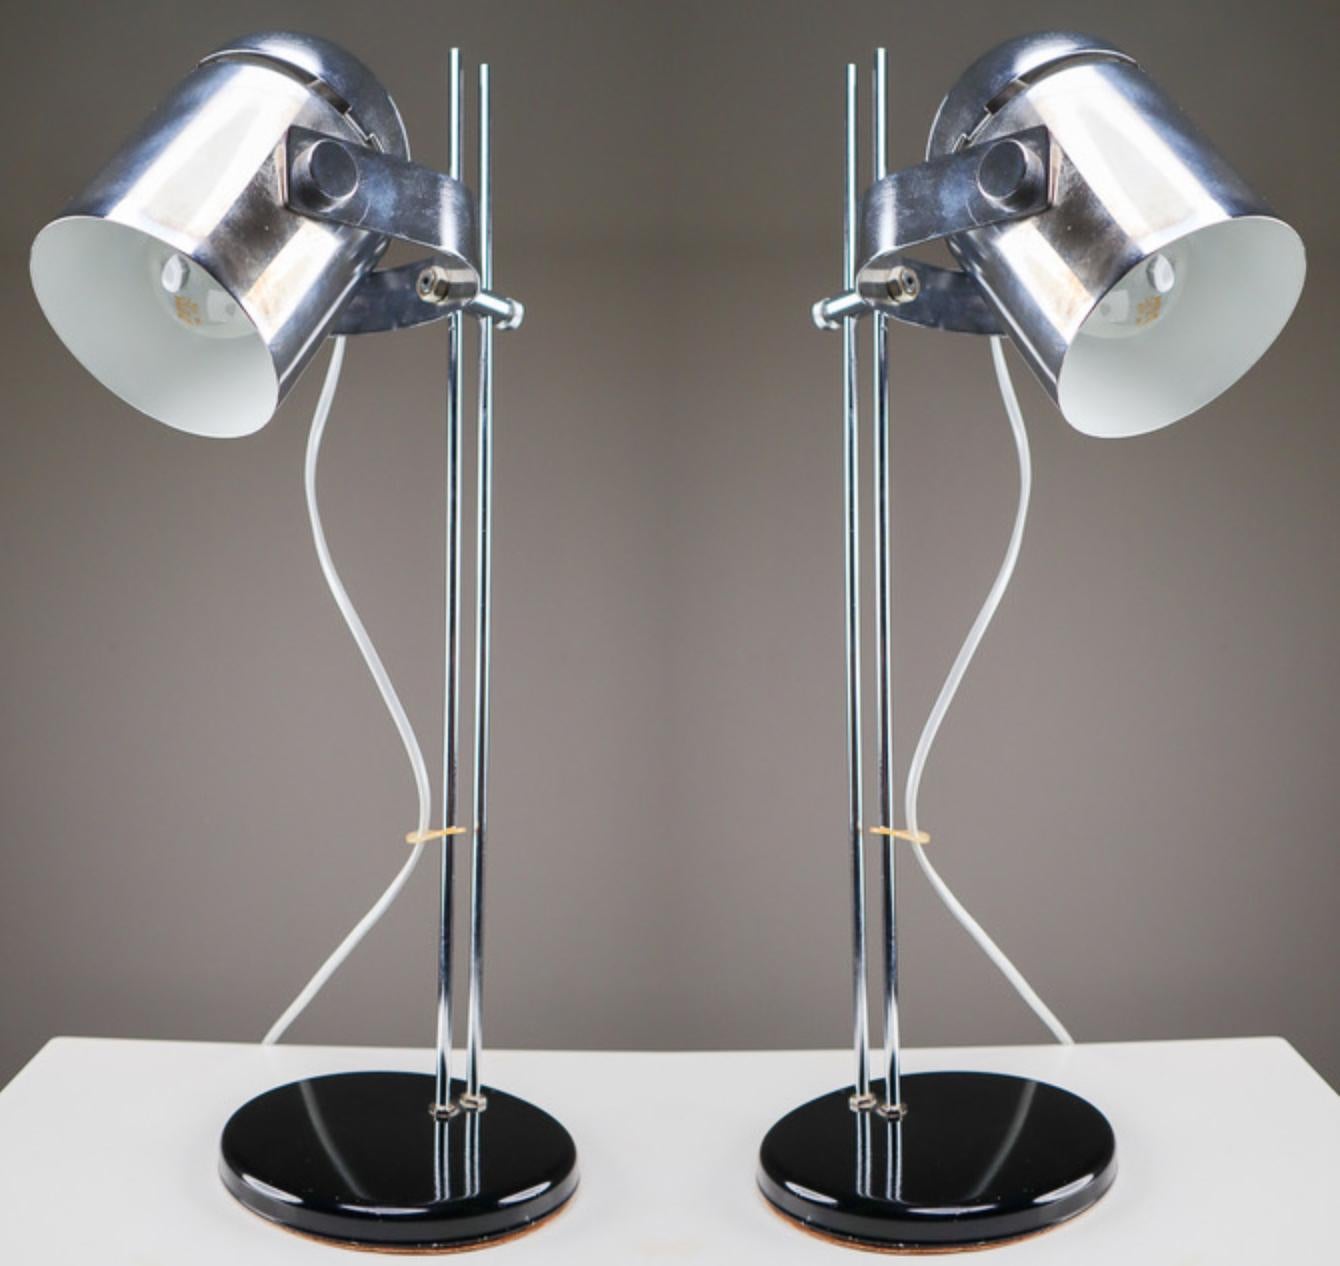 A large set of sixteen German adjustable height desk lamps, with cylindrical polish steel shade on a chromed metal post with circular black metal base. The shade can be moved up and down the post to the desired height and the shade can be easily